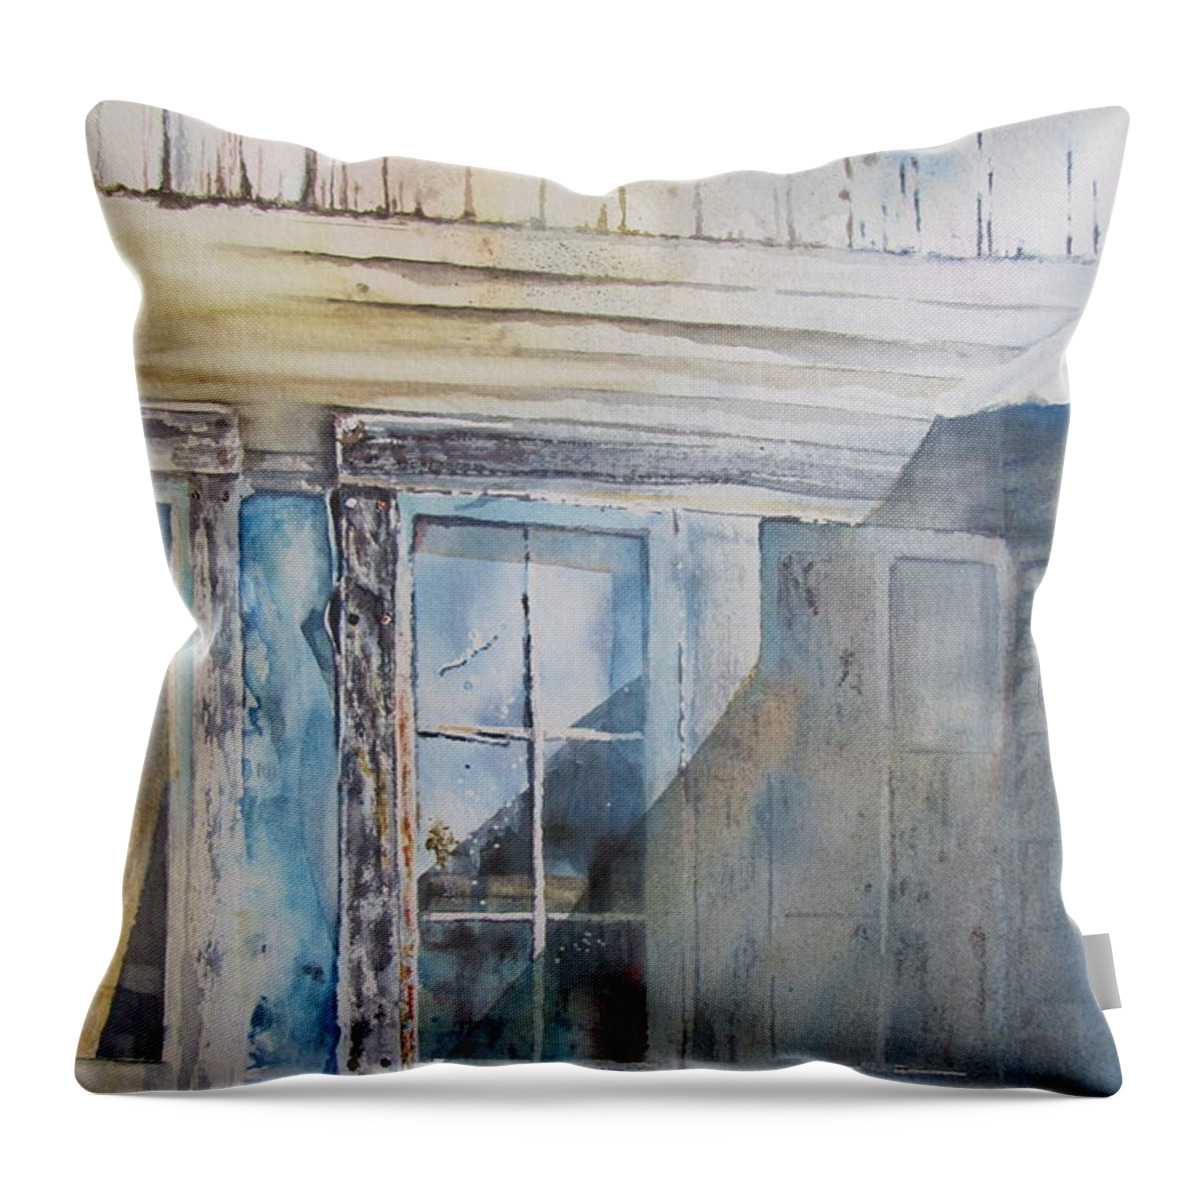 Windows Throw Pillow featuring the painting Windows by Amanda Amend